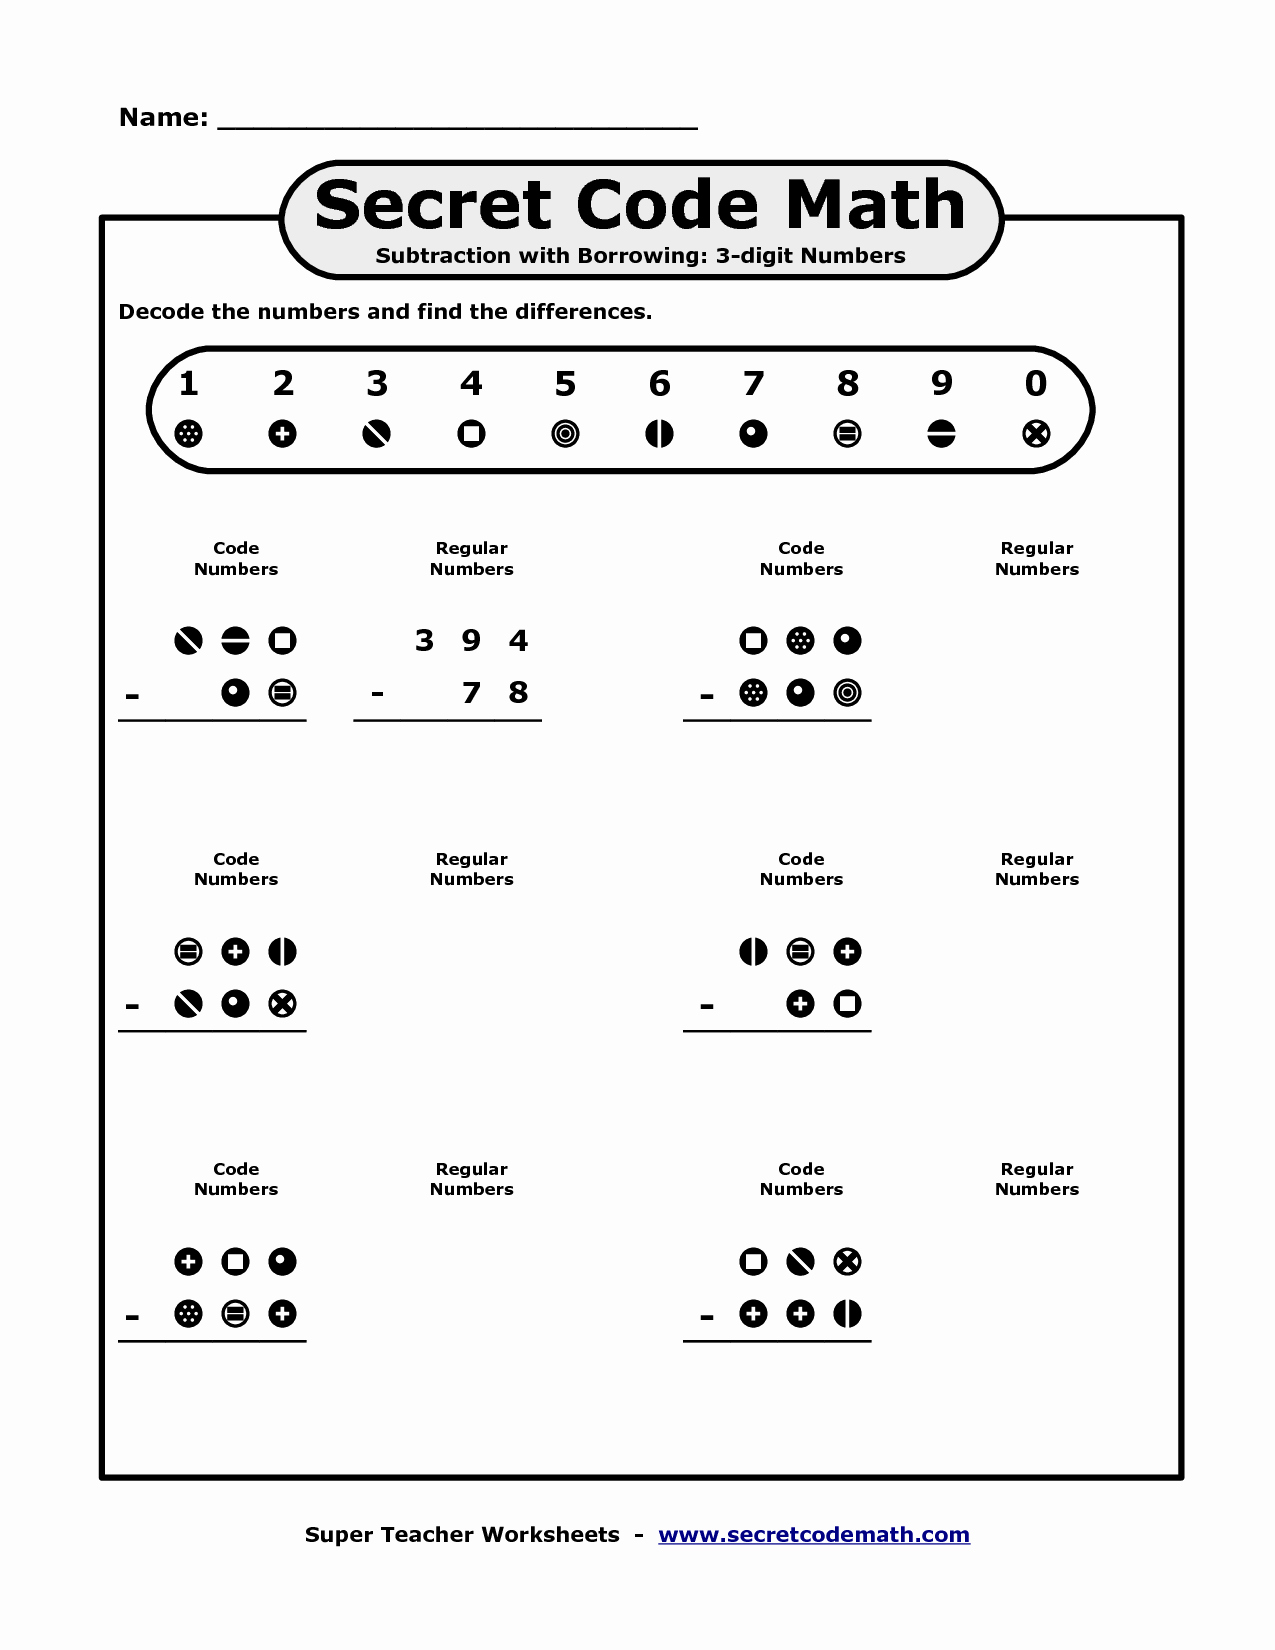 Cracking the Code Math Worksheets Inspirational Crack the Code Math Worksheet Answers